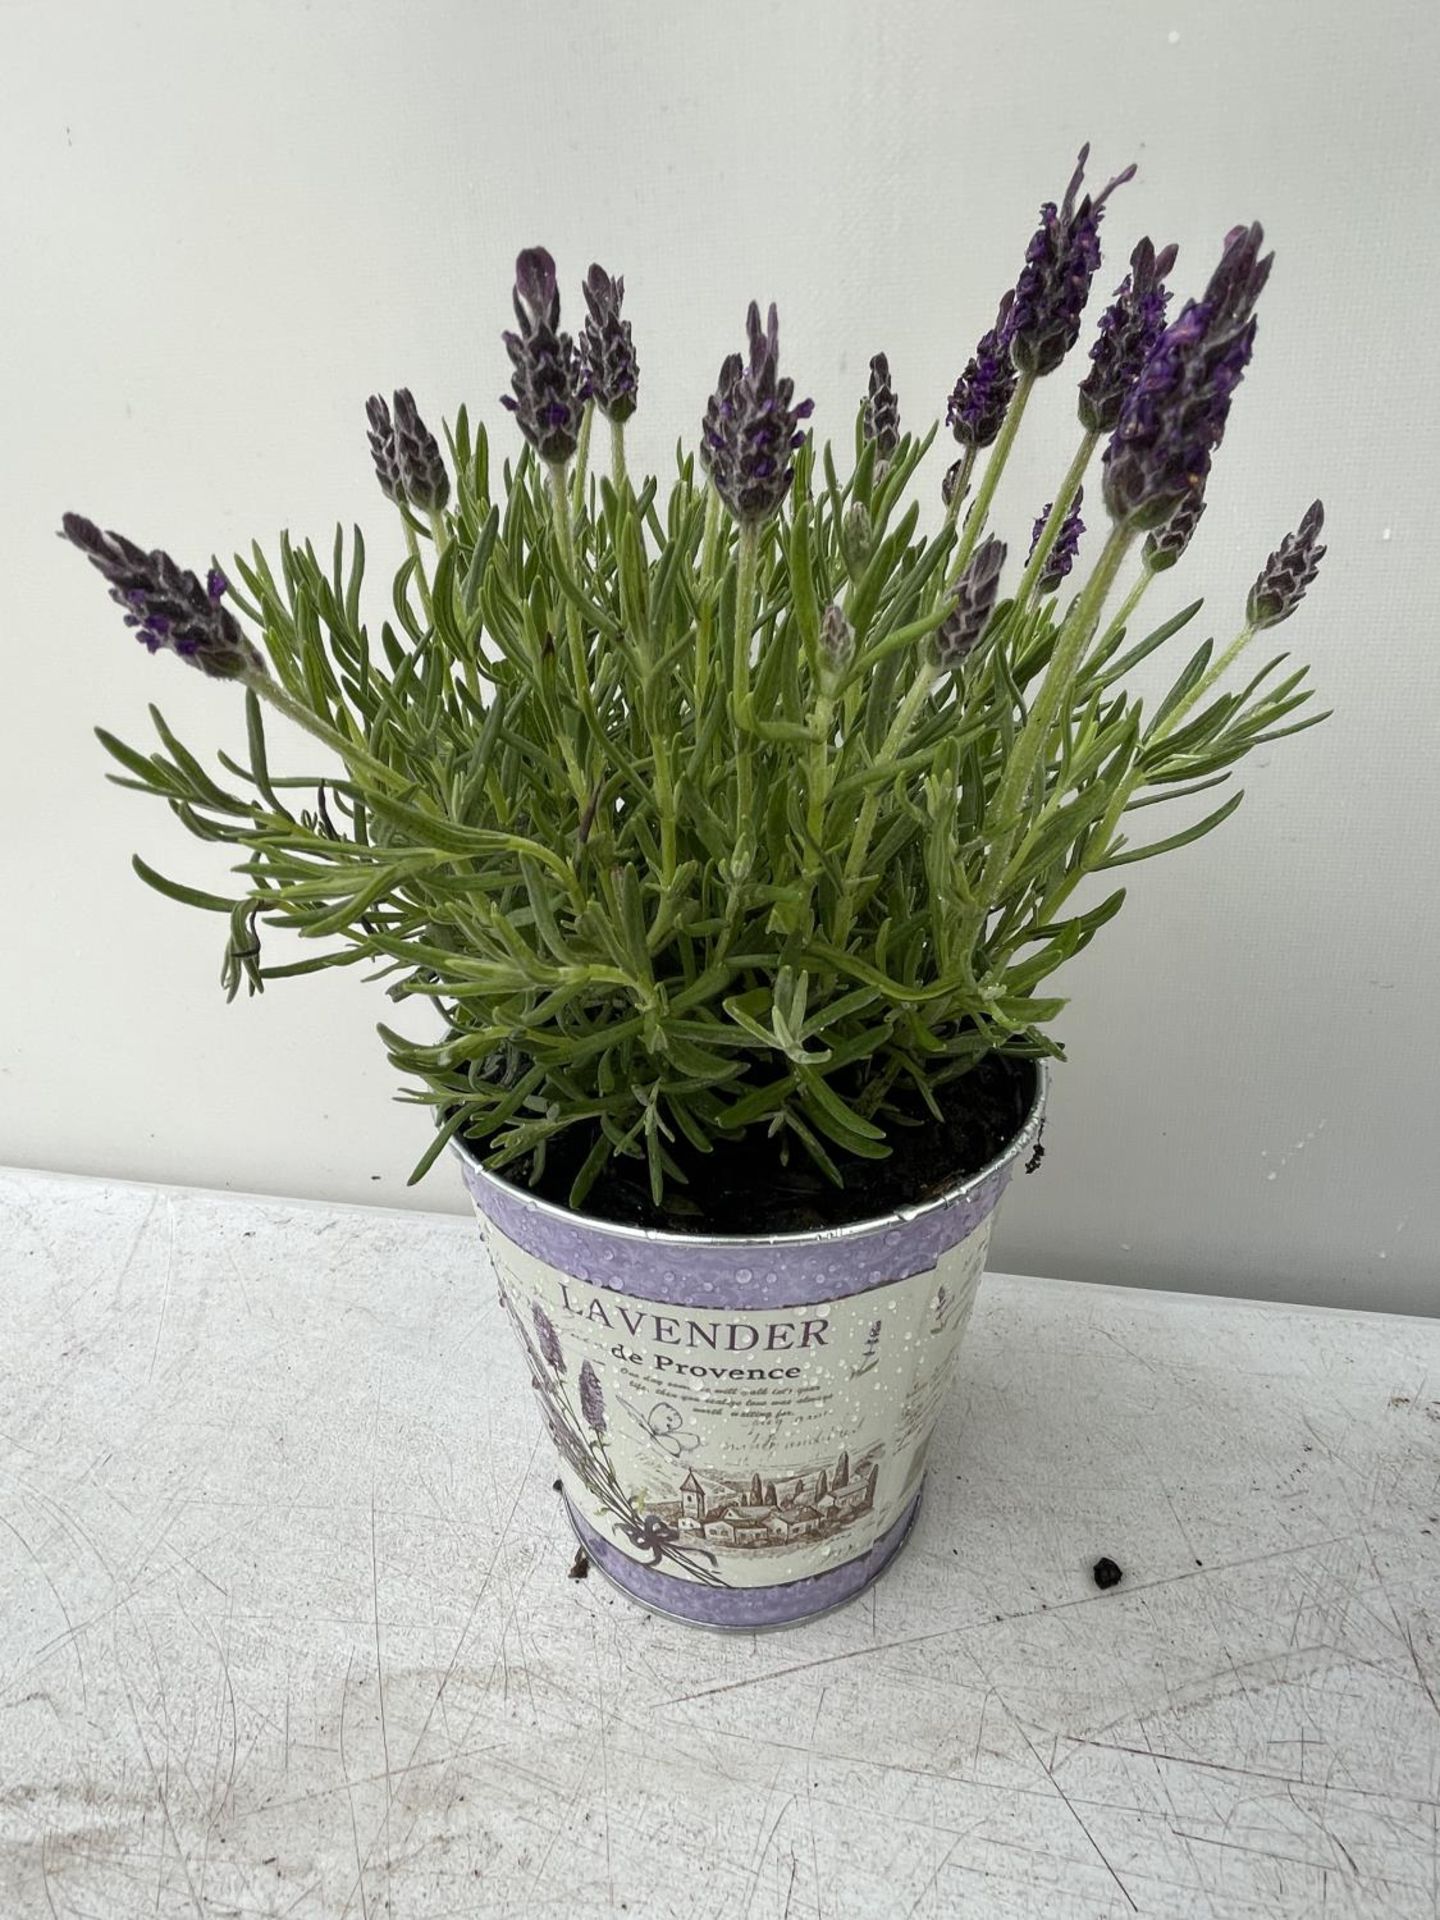 SIX LAVENDULA ST ANOUK COLLECTION IN DECORATIVE METAL POTS TO BE SOLD FOR THE SIX NO VAT - Image 3 of 6